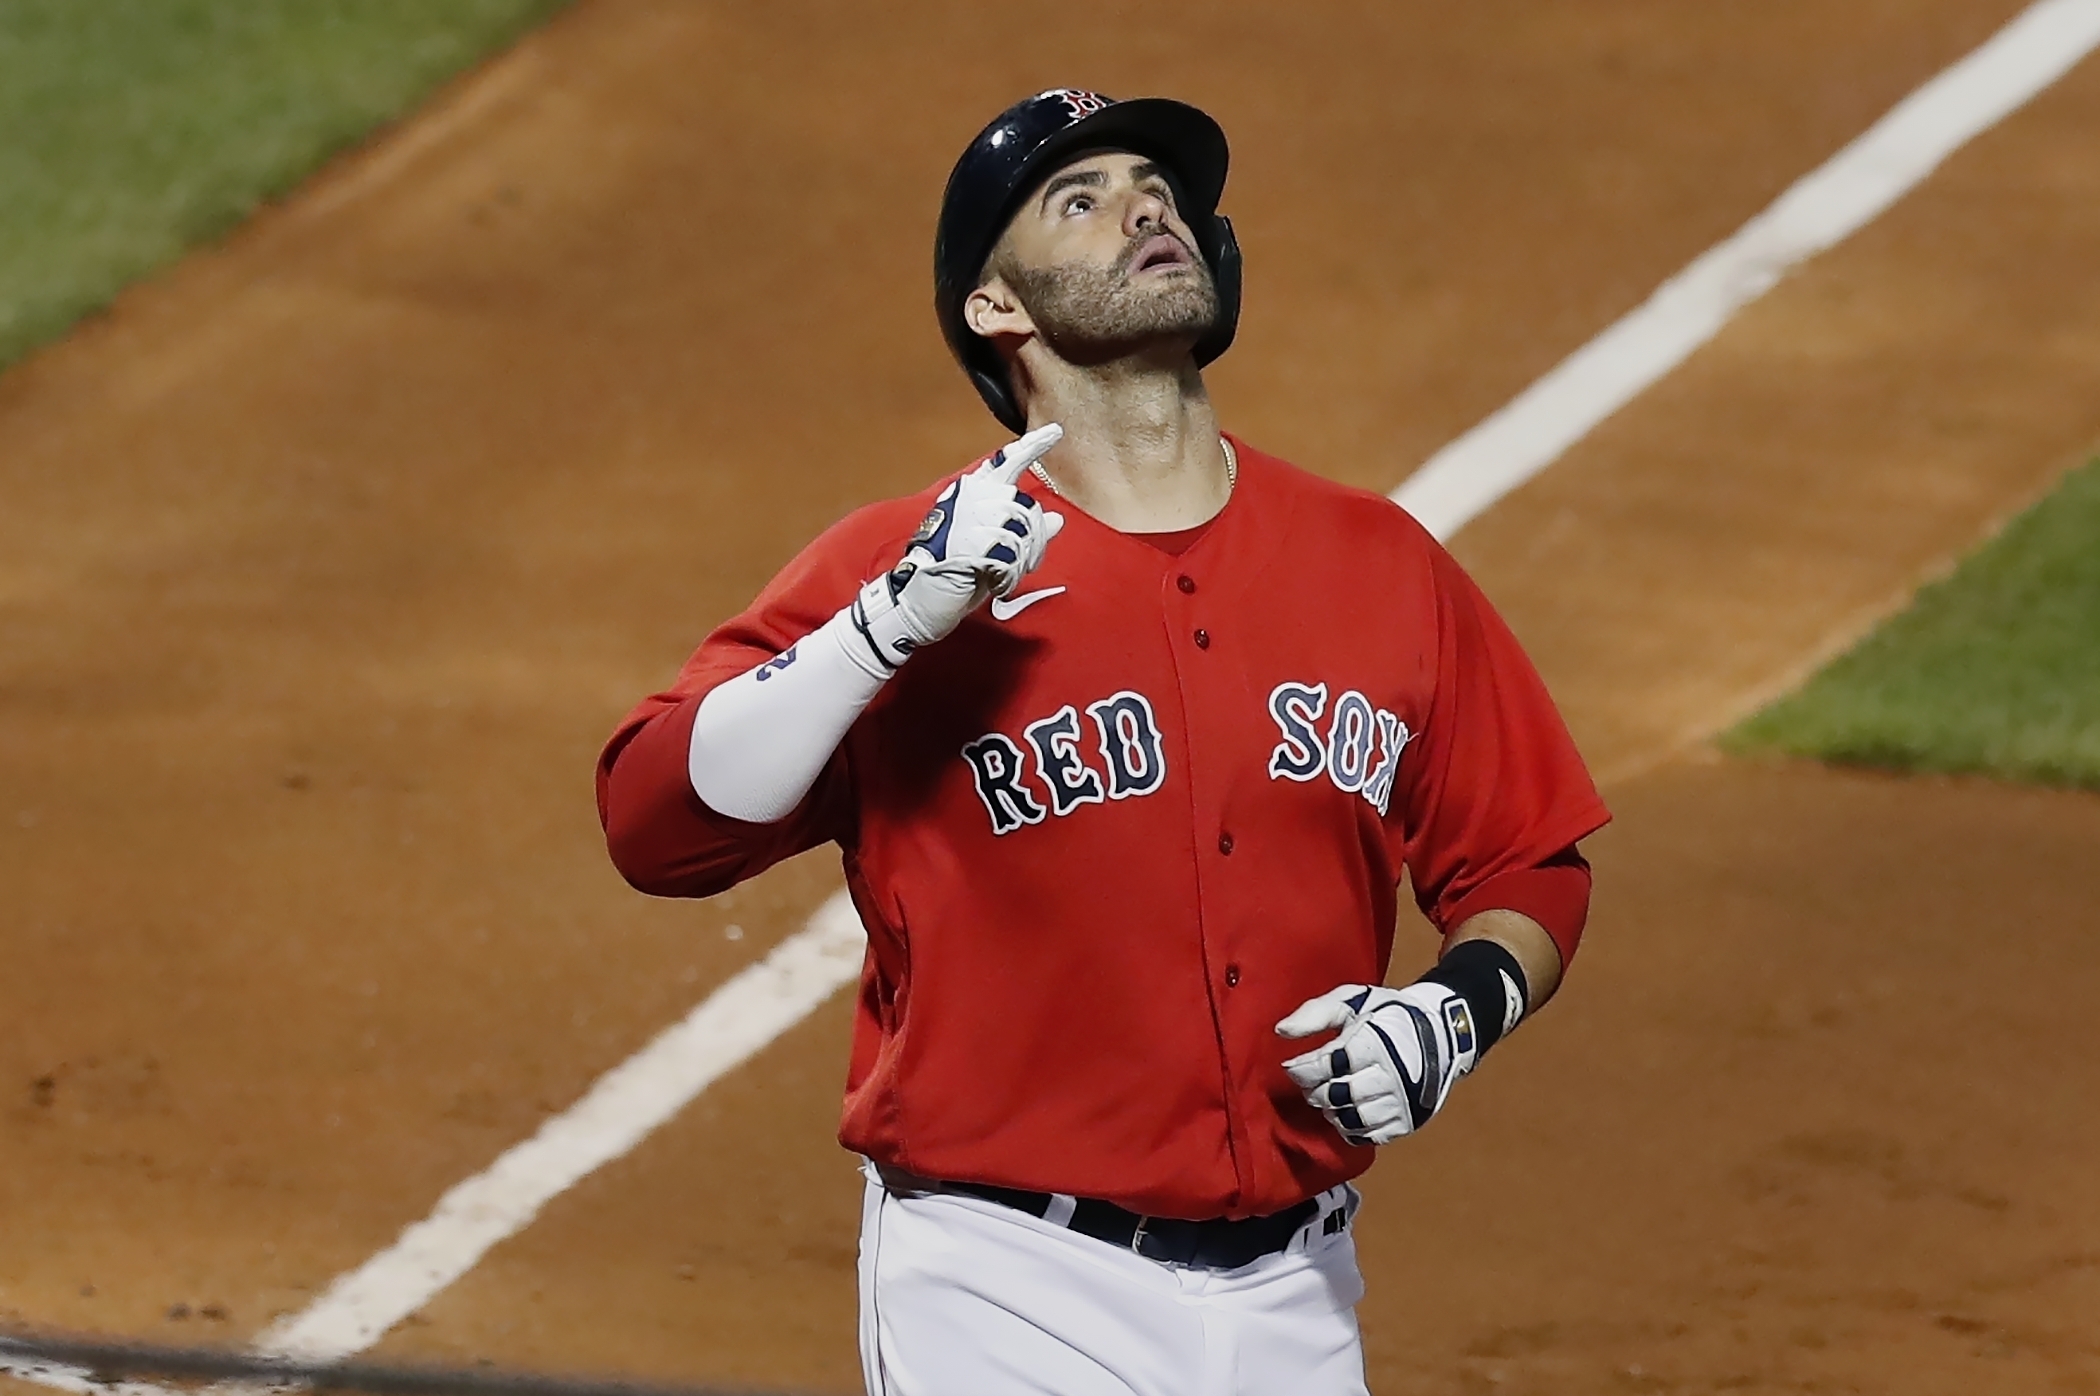 Thanks to his jersey, there's no excuse for not knowing this is 'J.D.'  Martinez